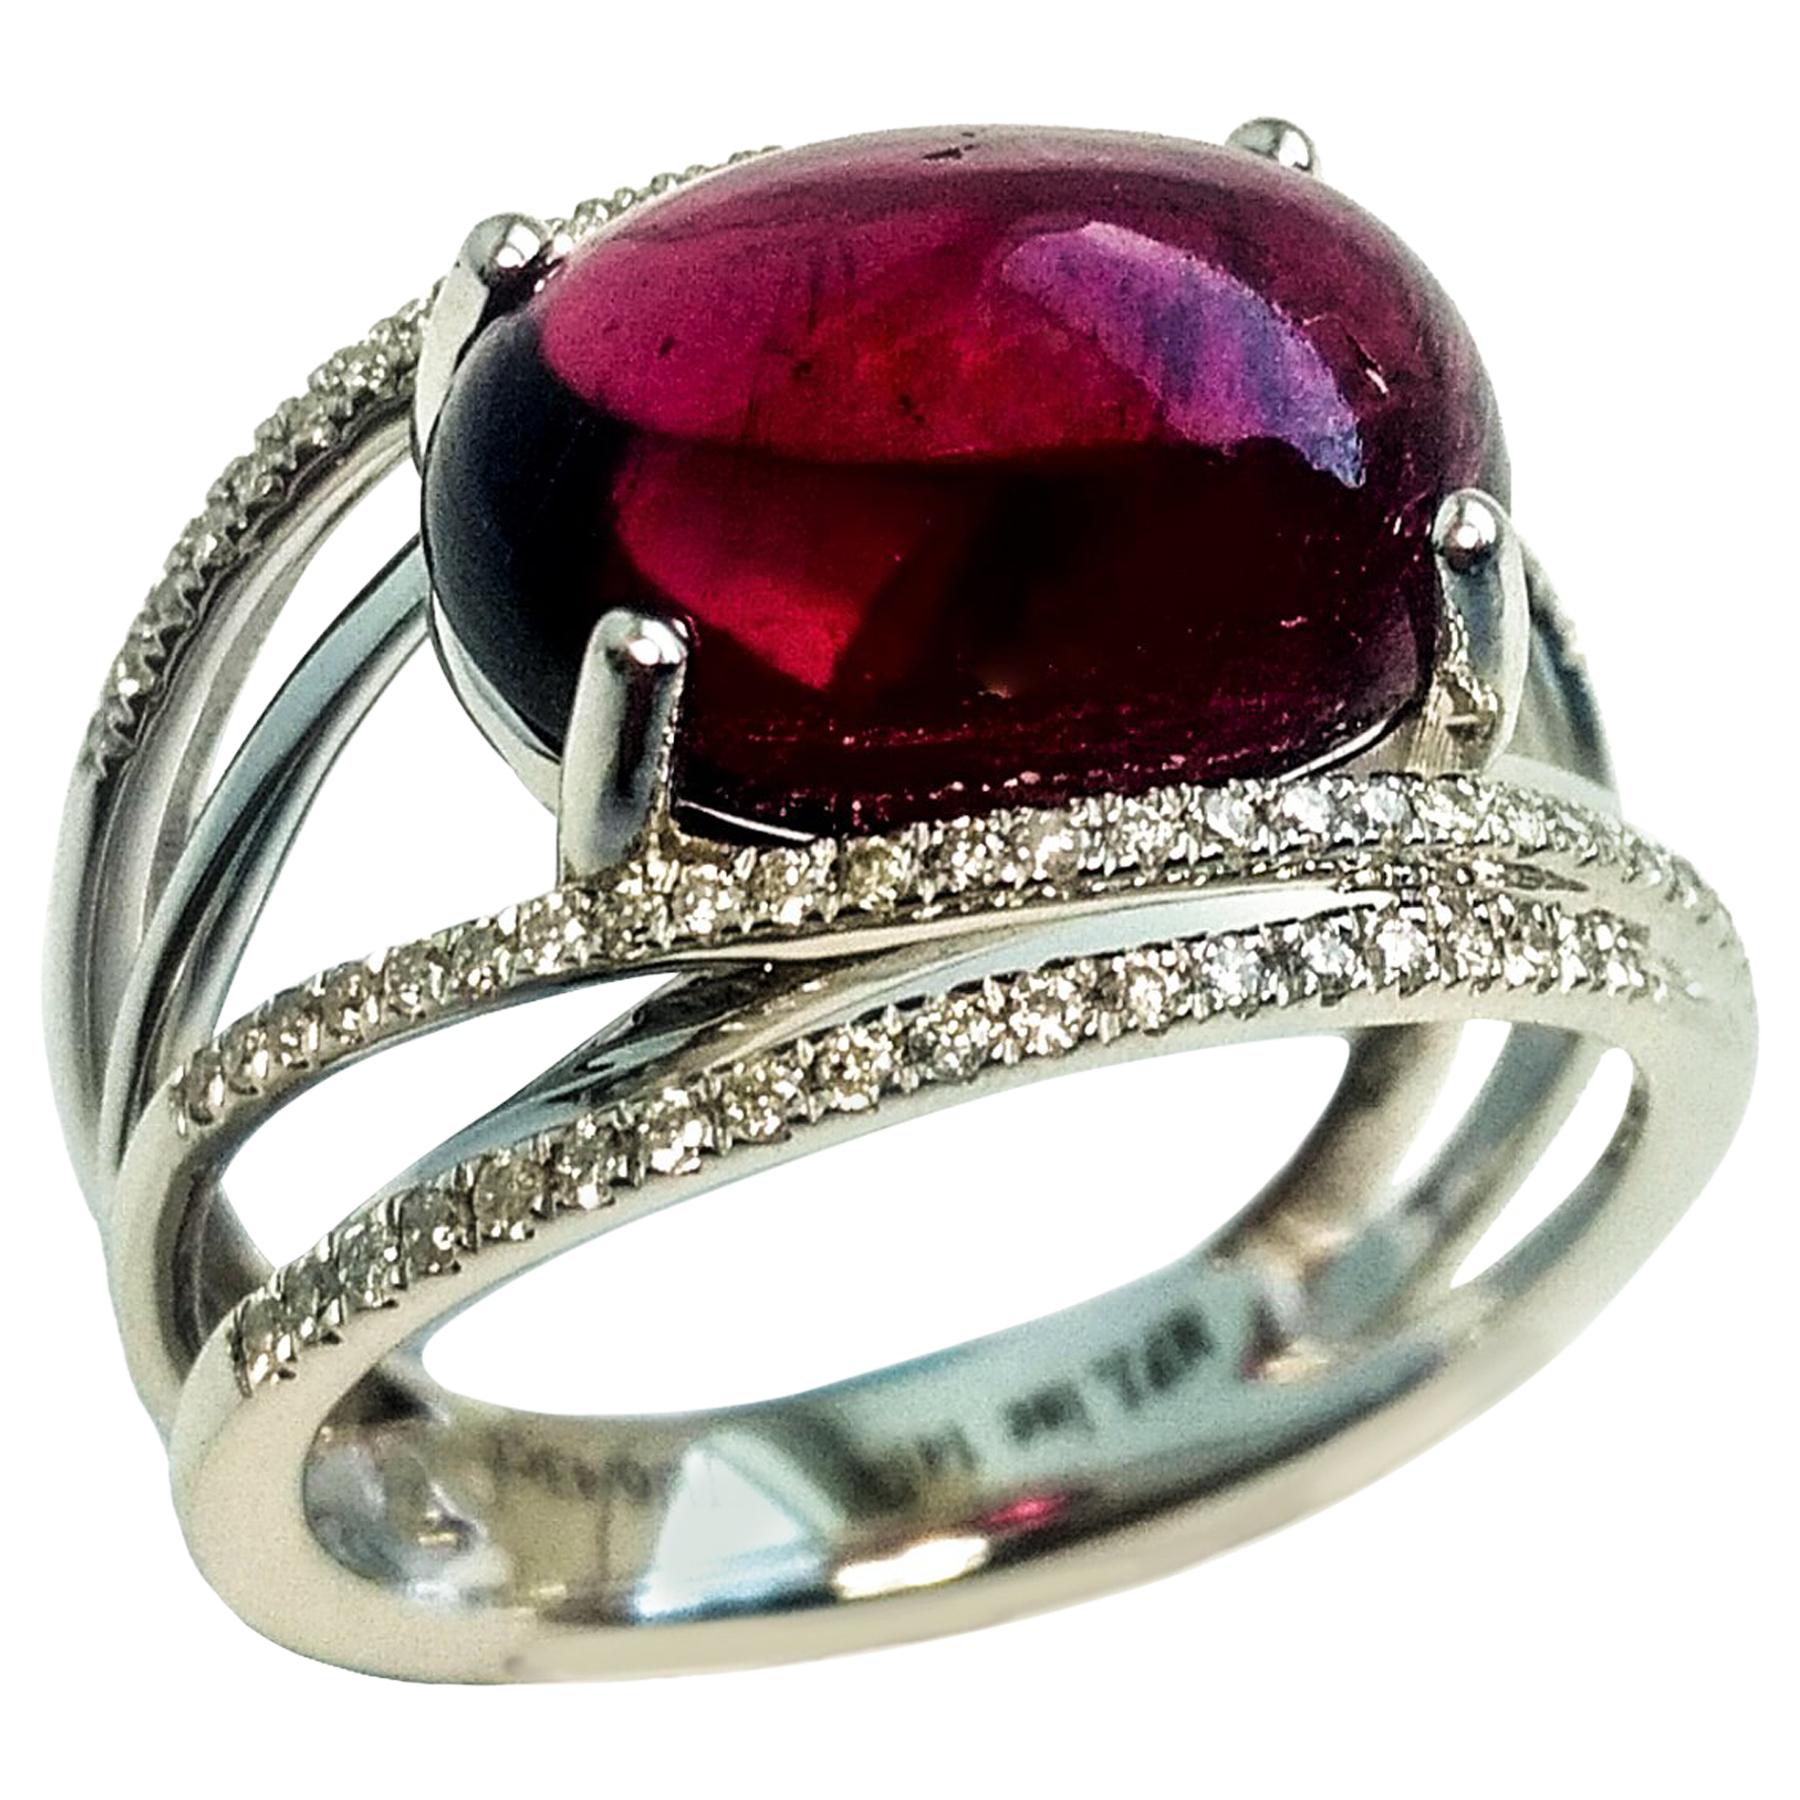 Contemporary, unique design, deep red cabochon rubellite, set in high profile mount with 4 prongs. Oval translucent, glassy looking rubellite, accented with sparkling round brilliant cut diamond design. Handcrafted in 14 karat white gold. 

The